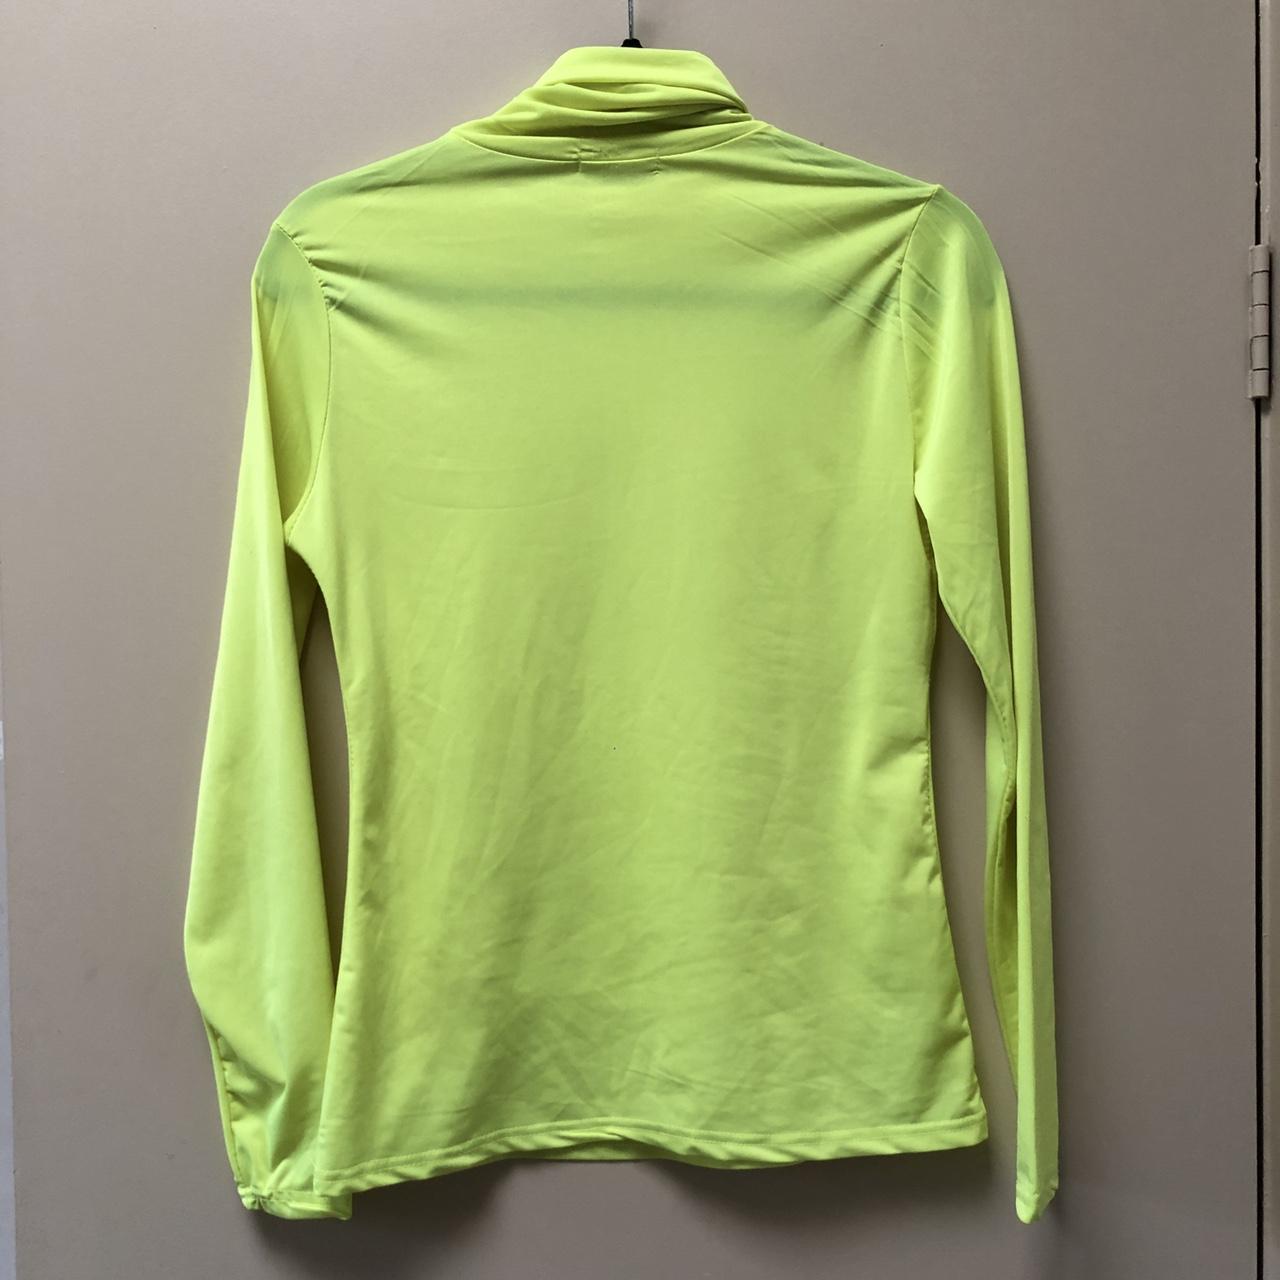 Neon yellow skivvy/turtle neck top. Long sleeve and... - Depop